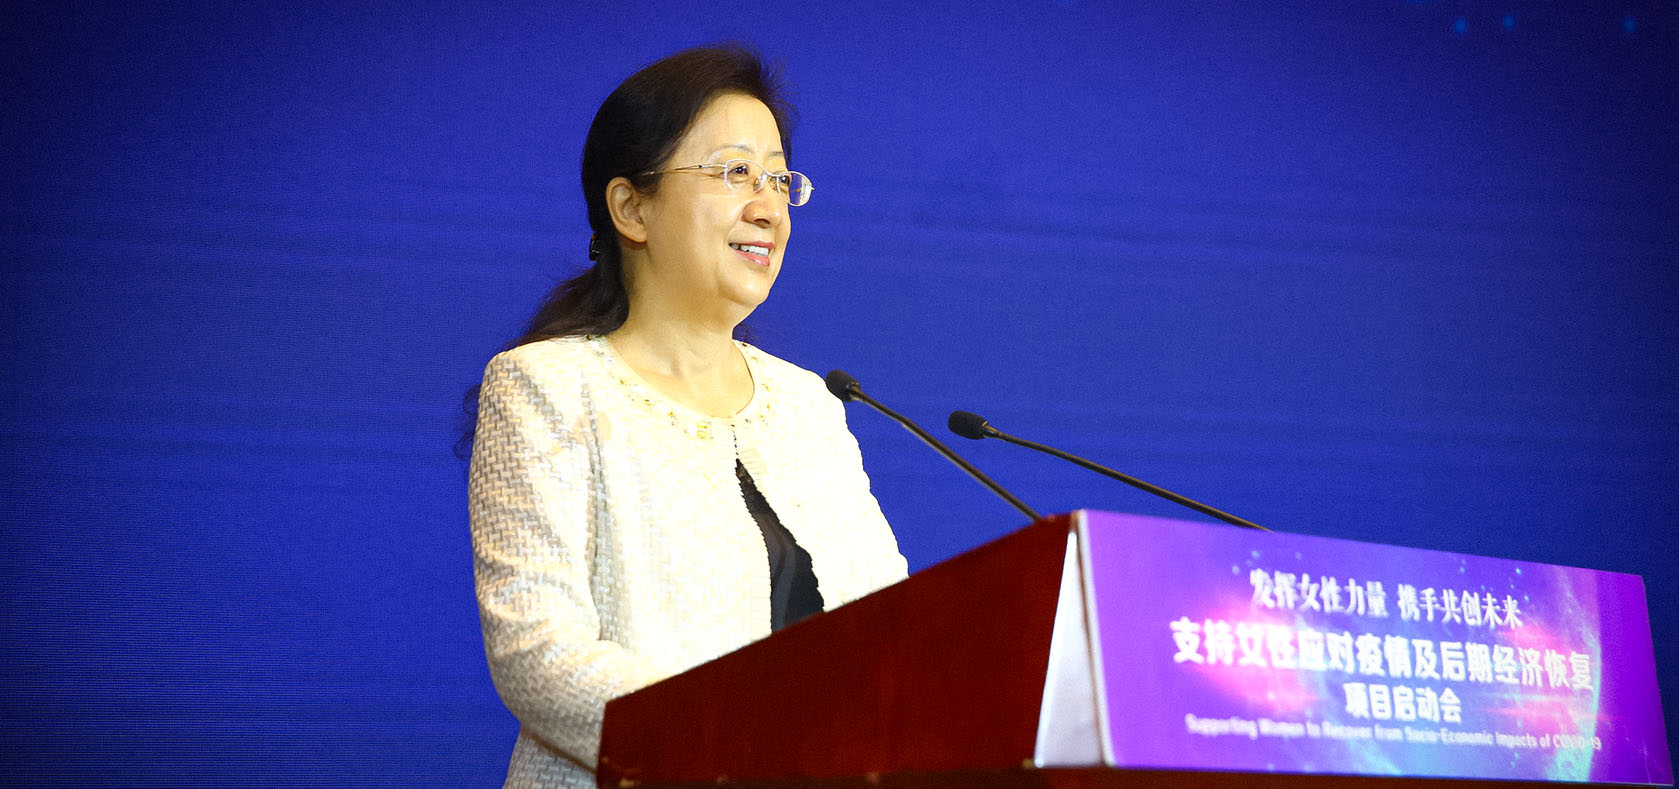 Xia Jie, the Vice-president of the All-China Women’s Federation, speaks at the 16 September 2021 launch  in Wuhan of the women’s businesses and COVID-19 recovery project. Photo: UN Women/Shi Jieyu